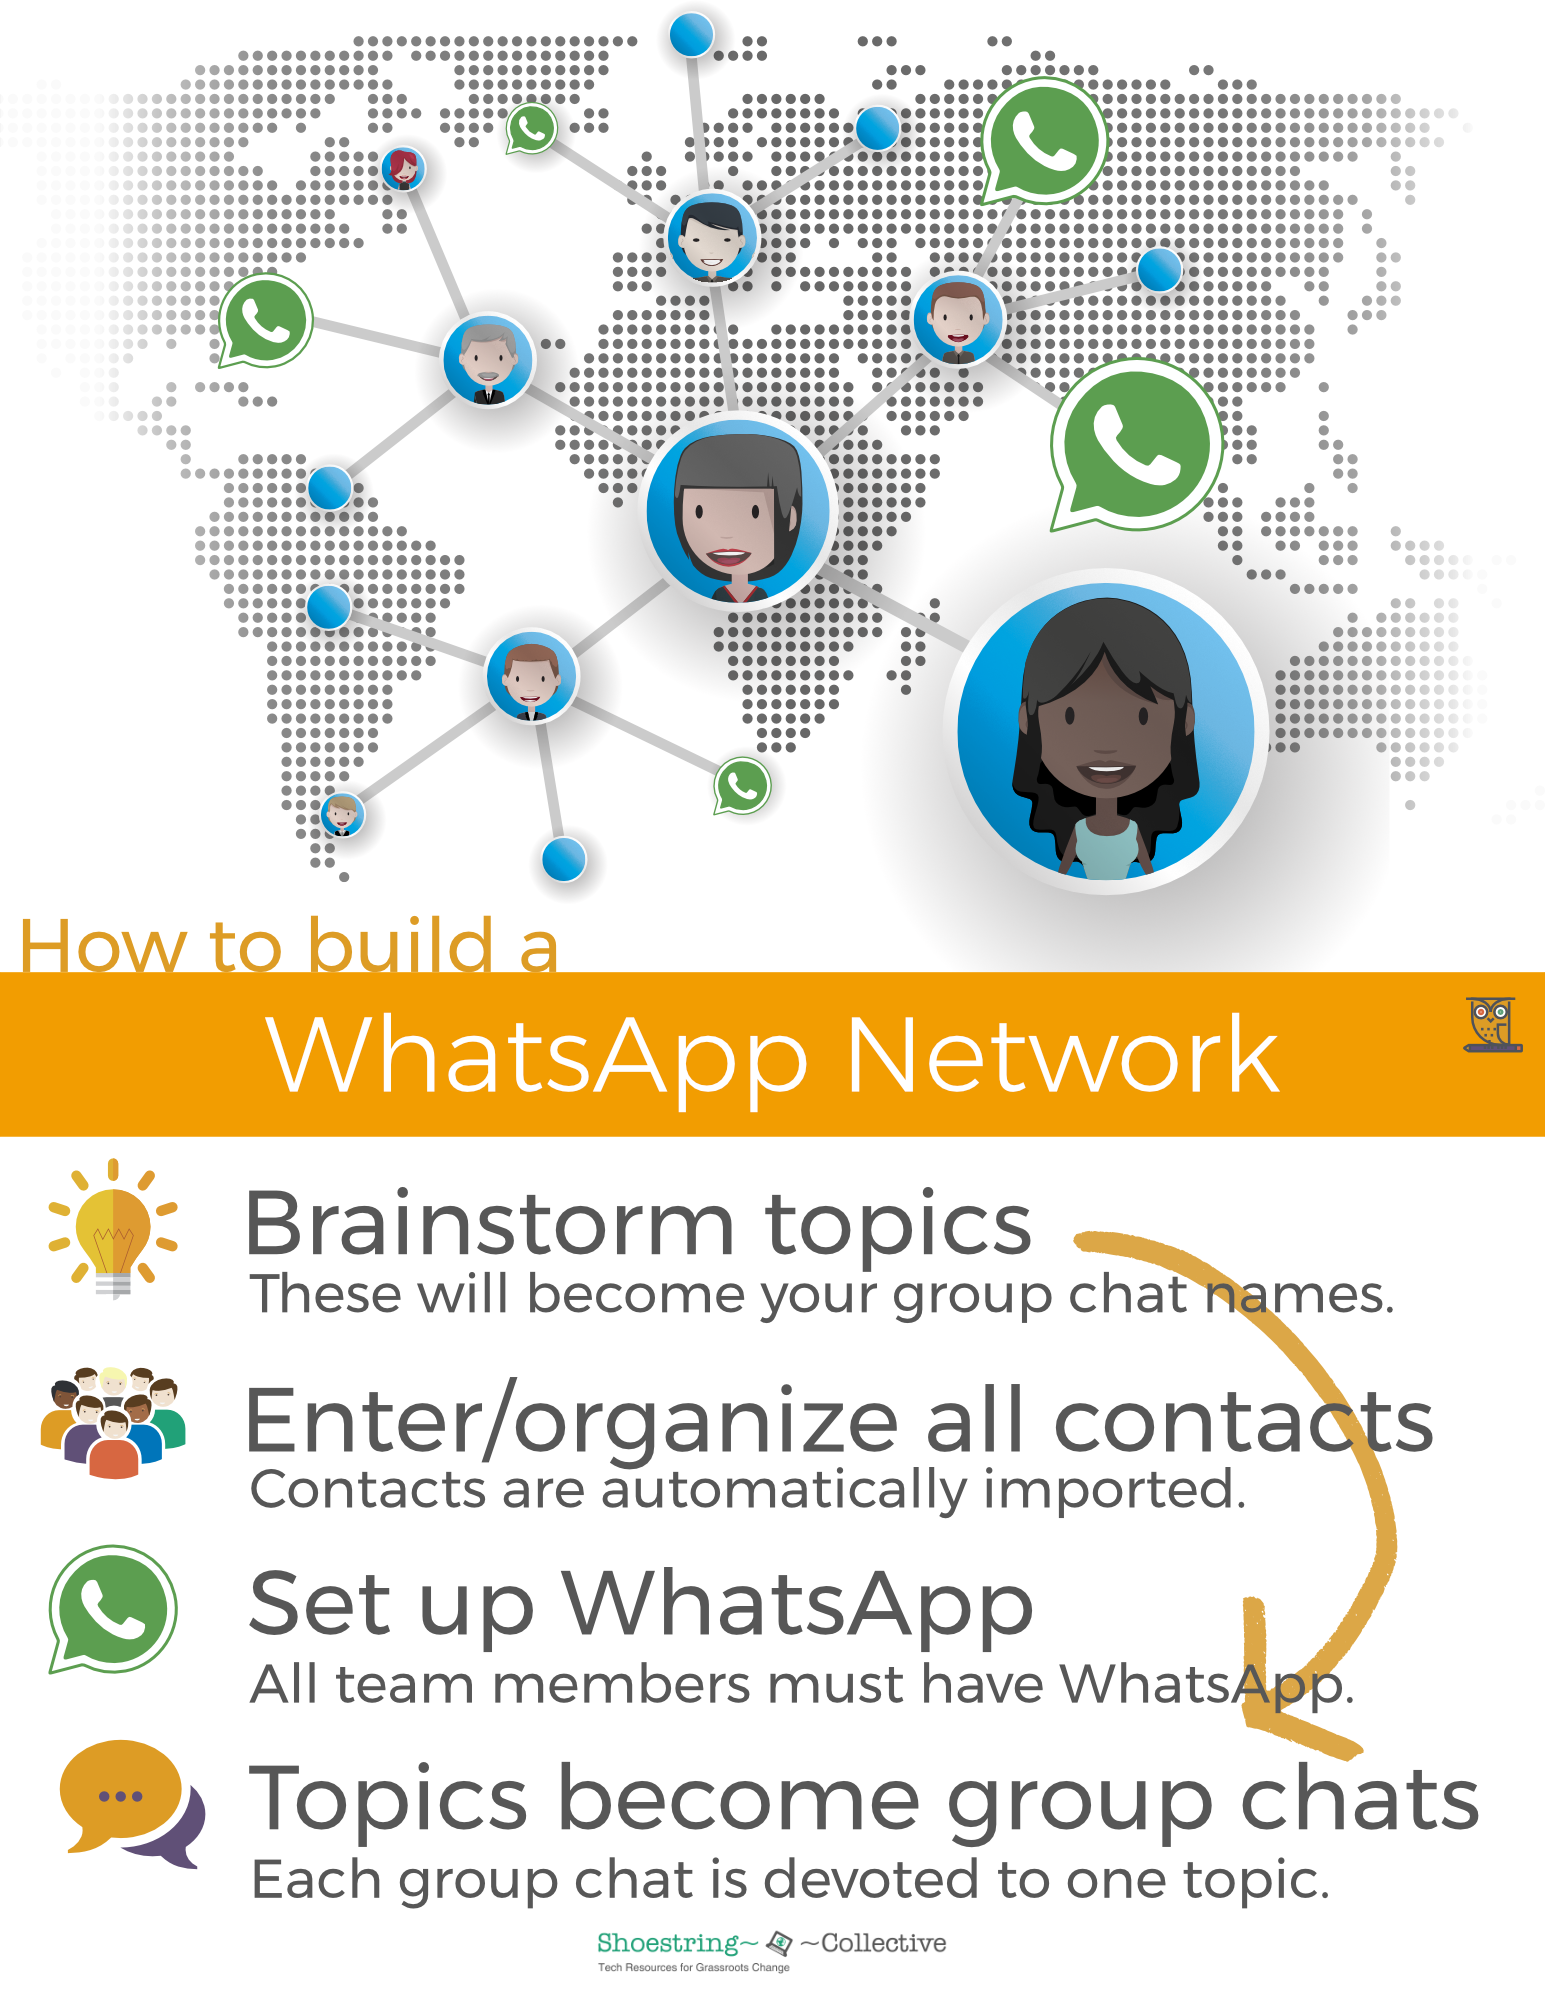 How to build a WhatsApp Network